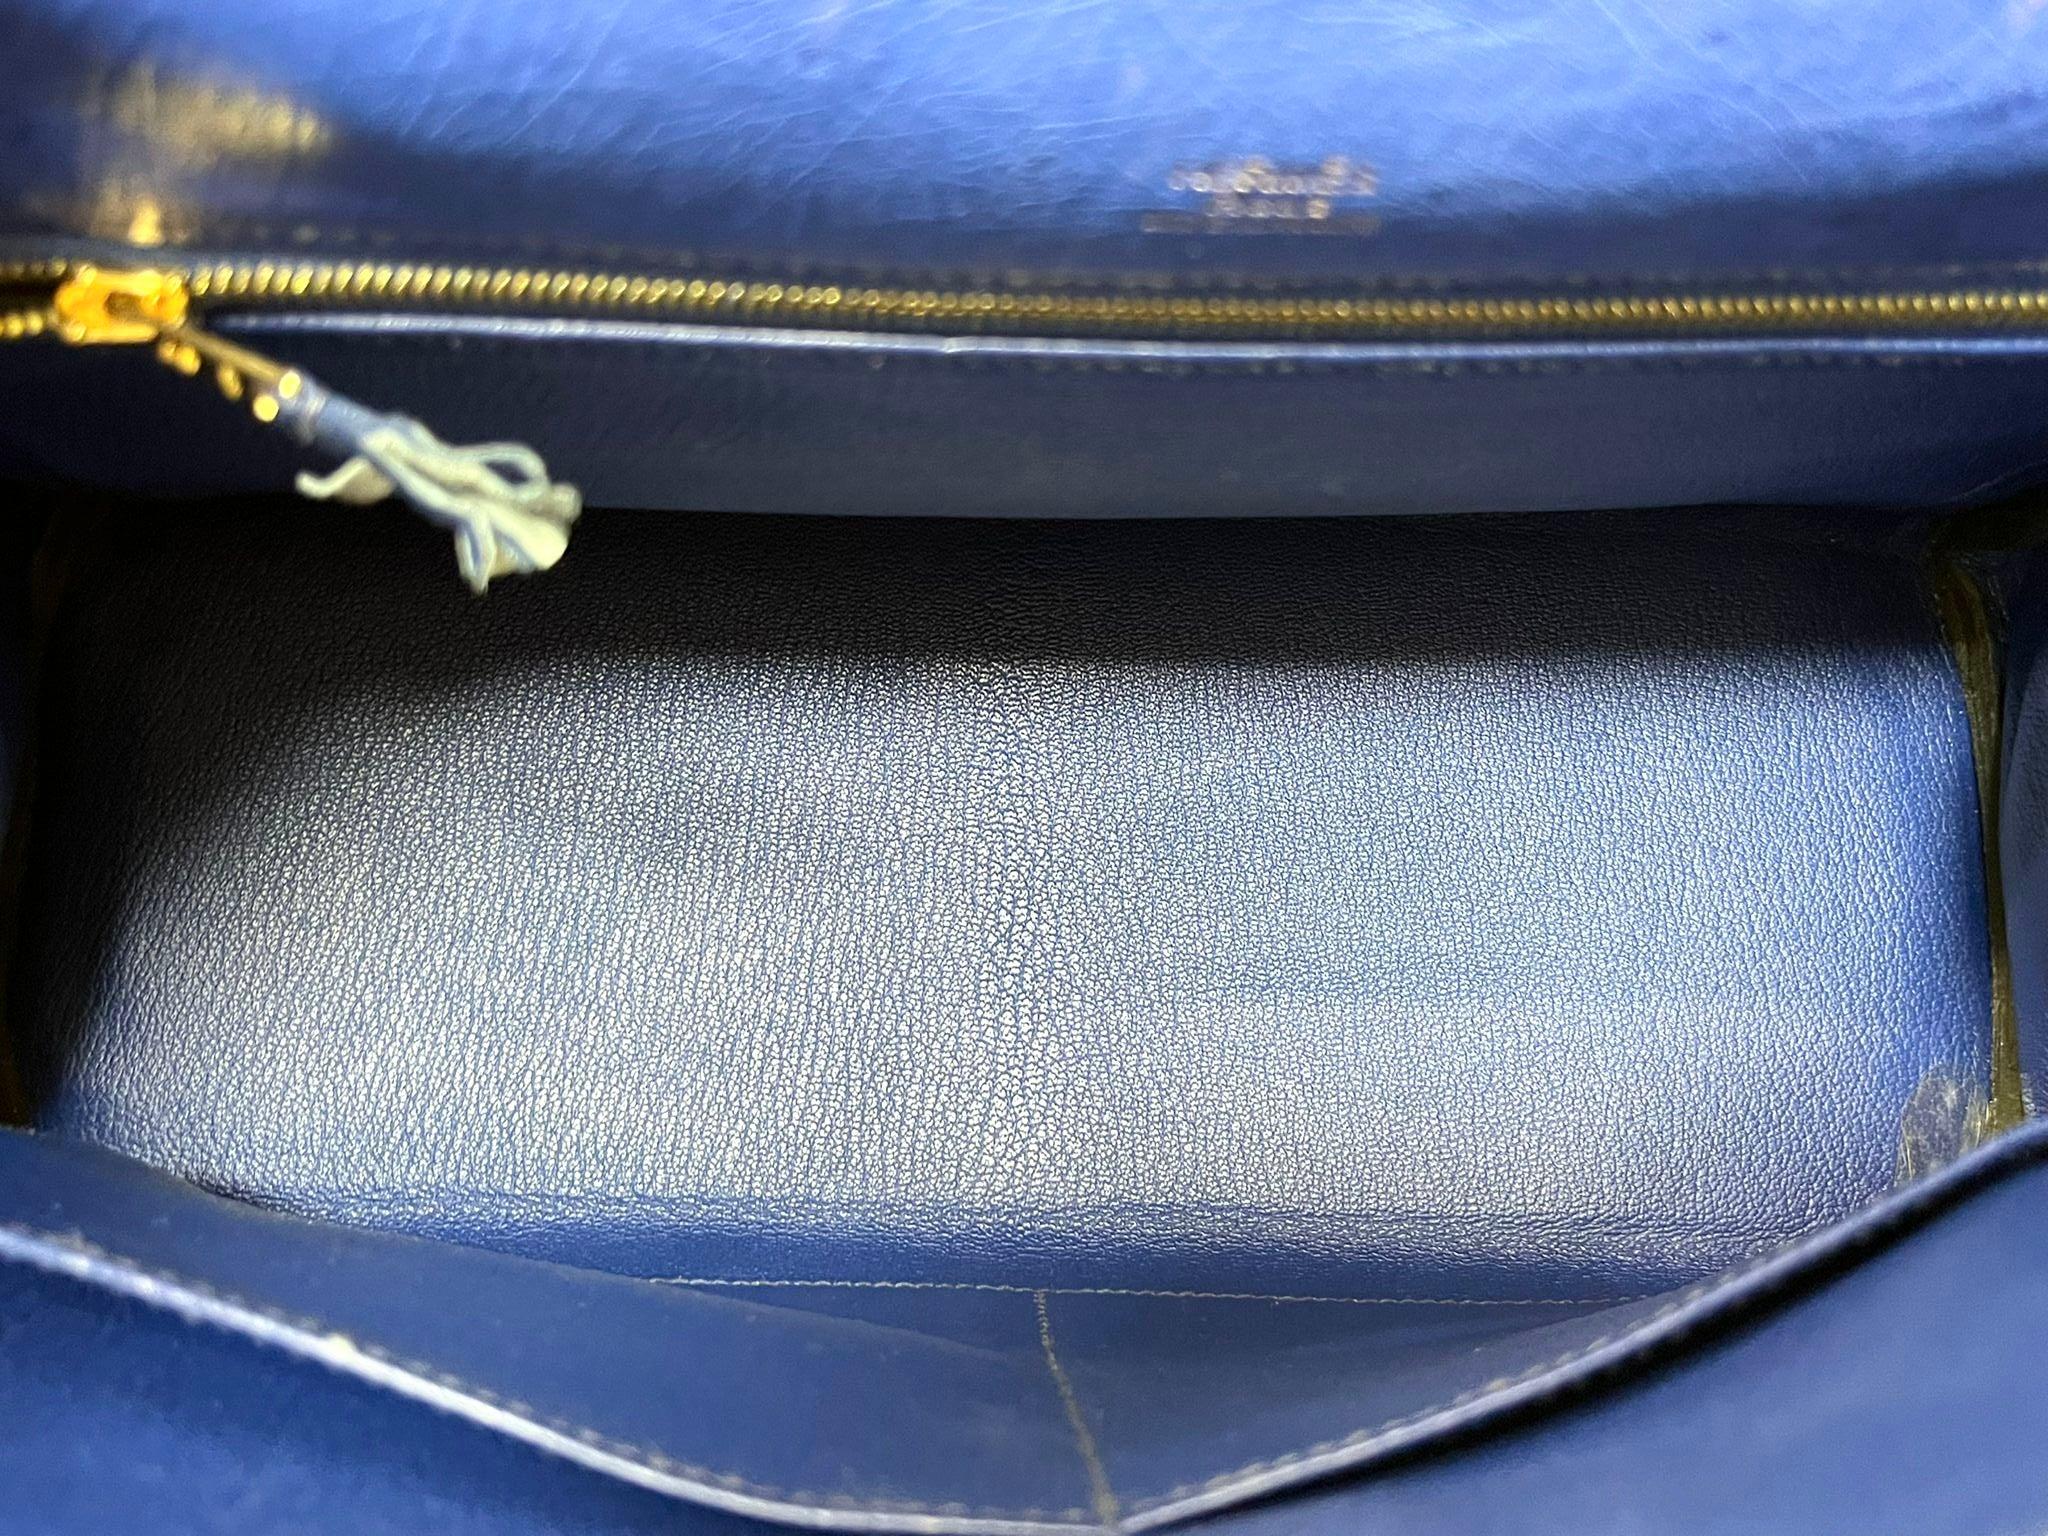 Hermes Kelly Ltd Edition Ghillies Bag In Ostrich Skin For Sale 2